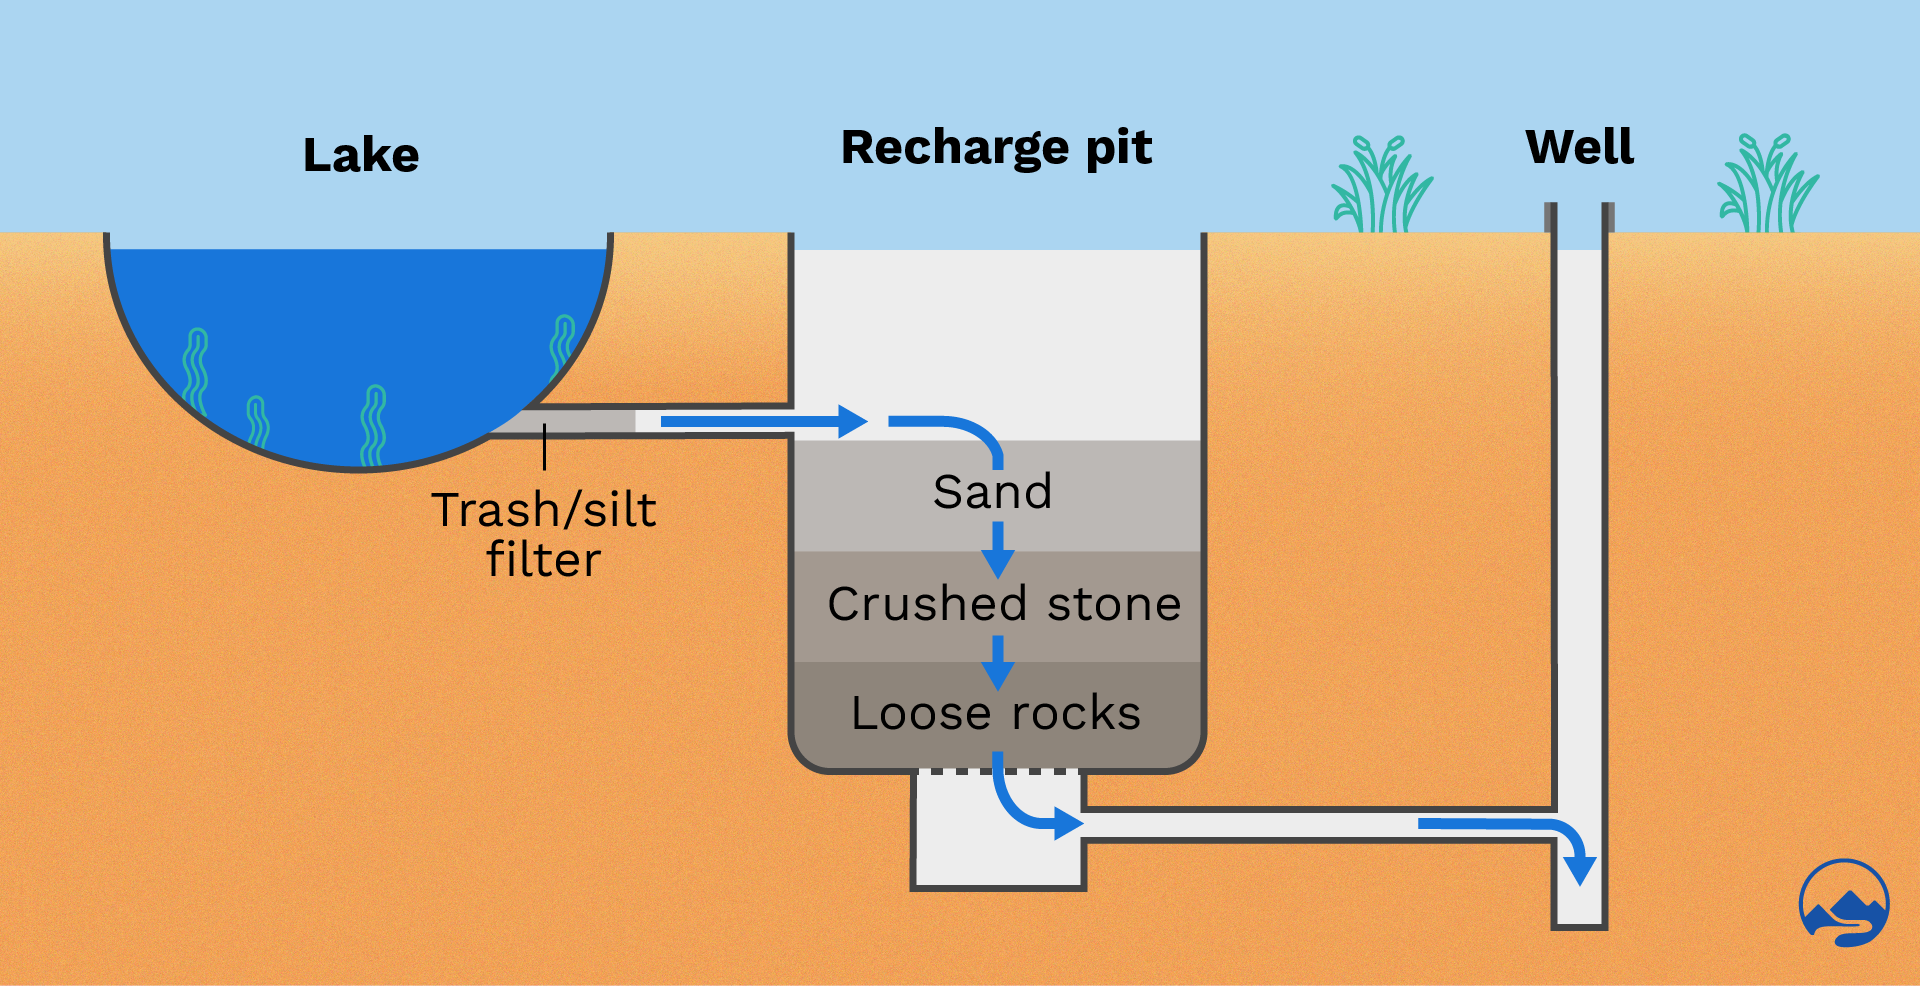 how does a groundwater recharge well work?